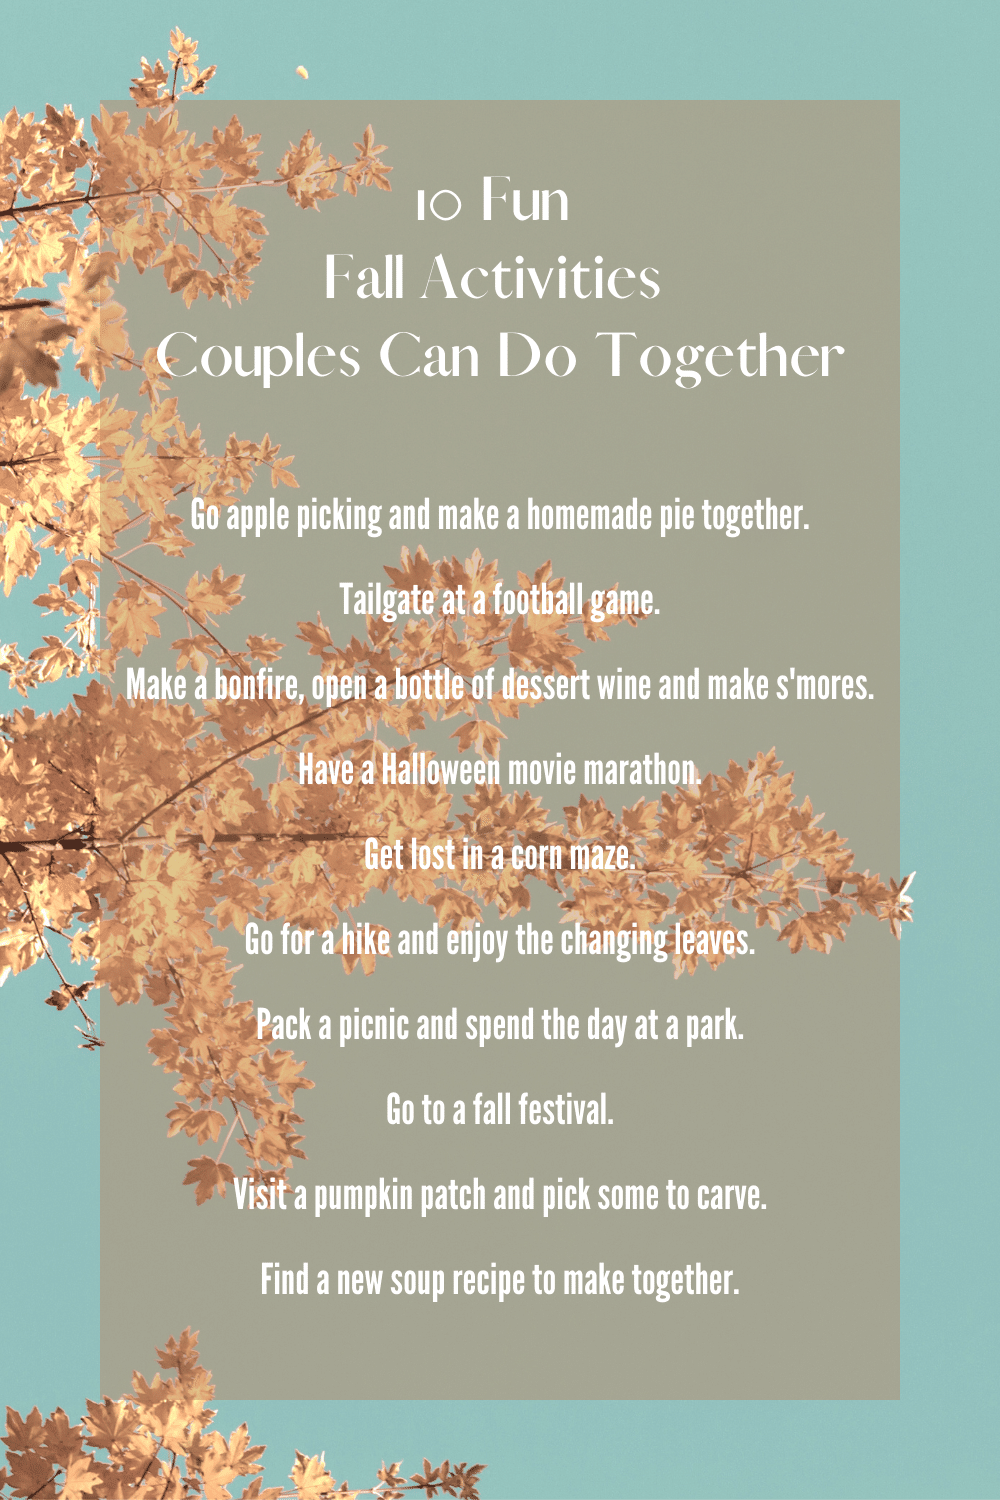 10 fun fall activities couples can do together